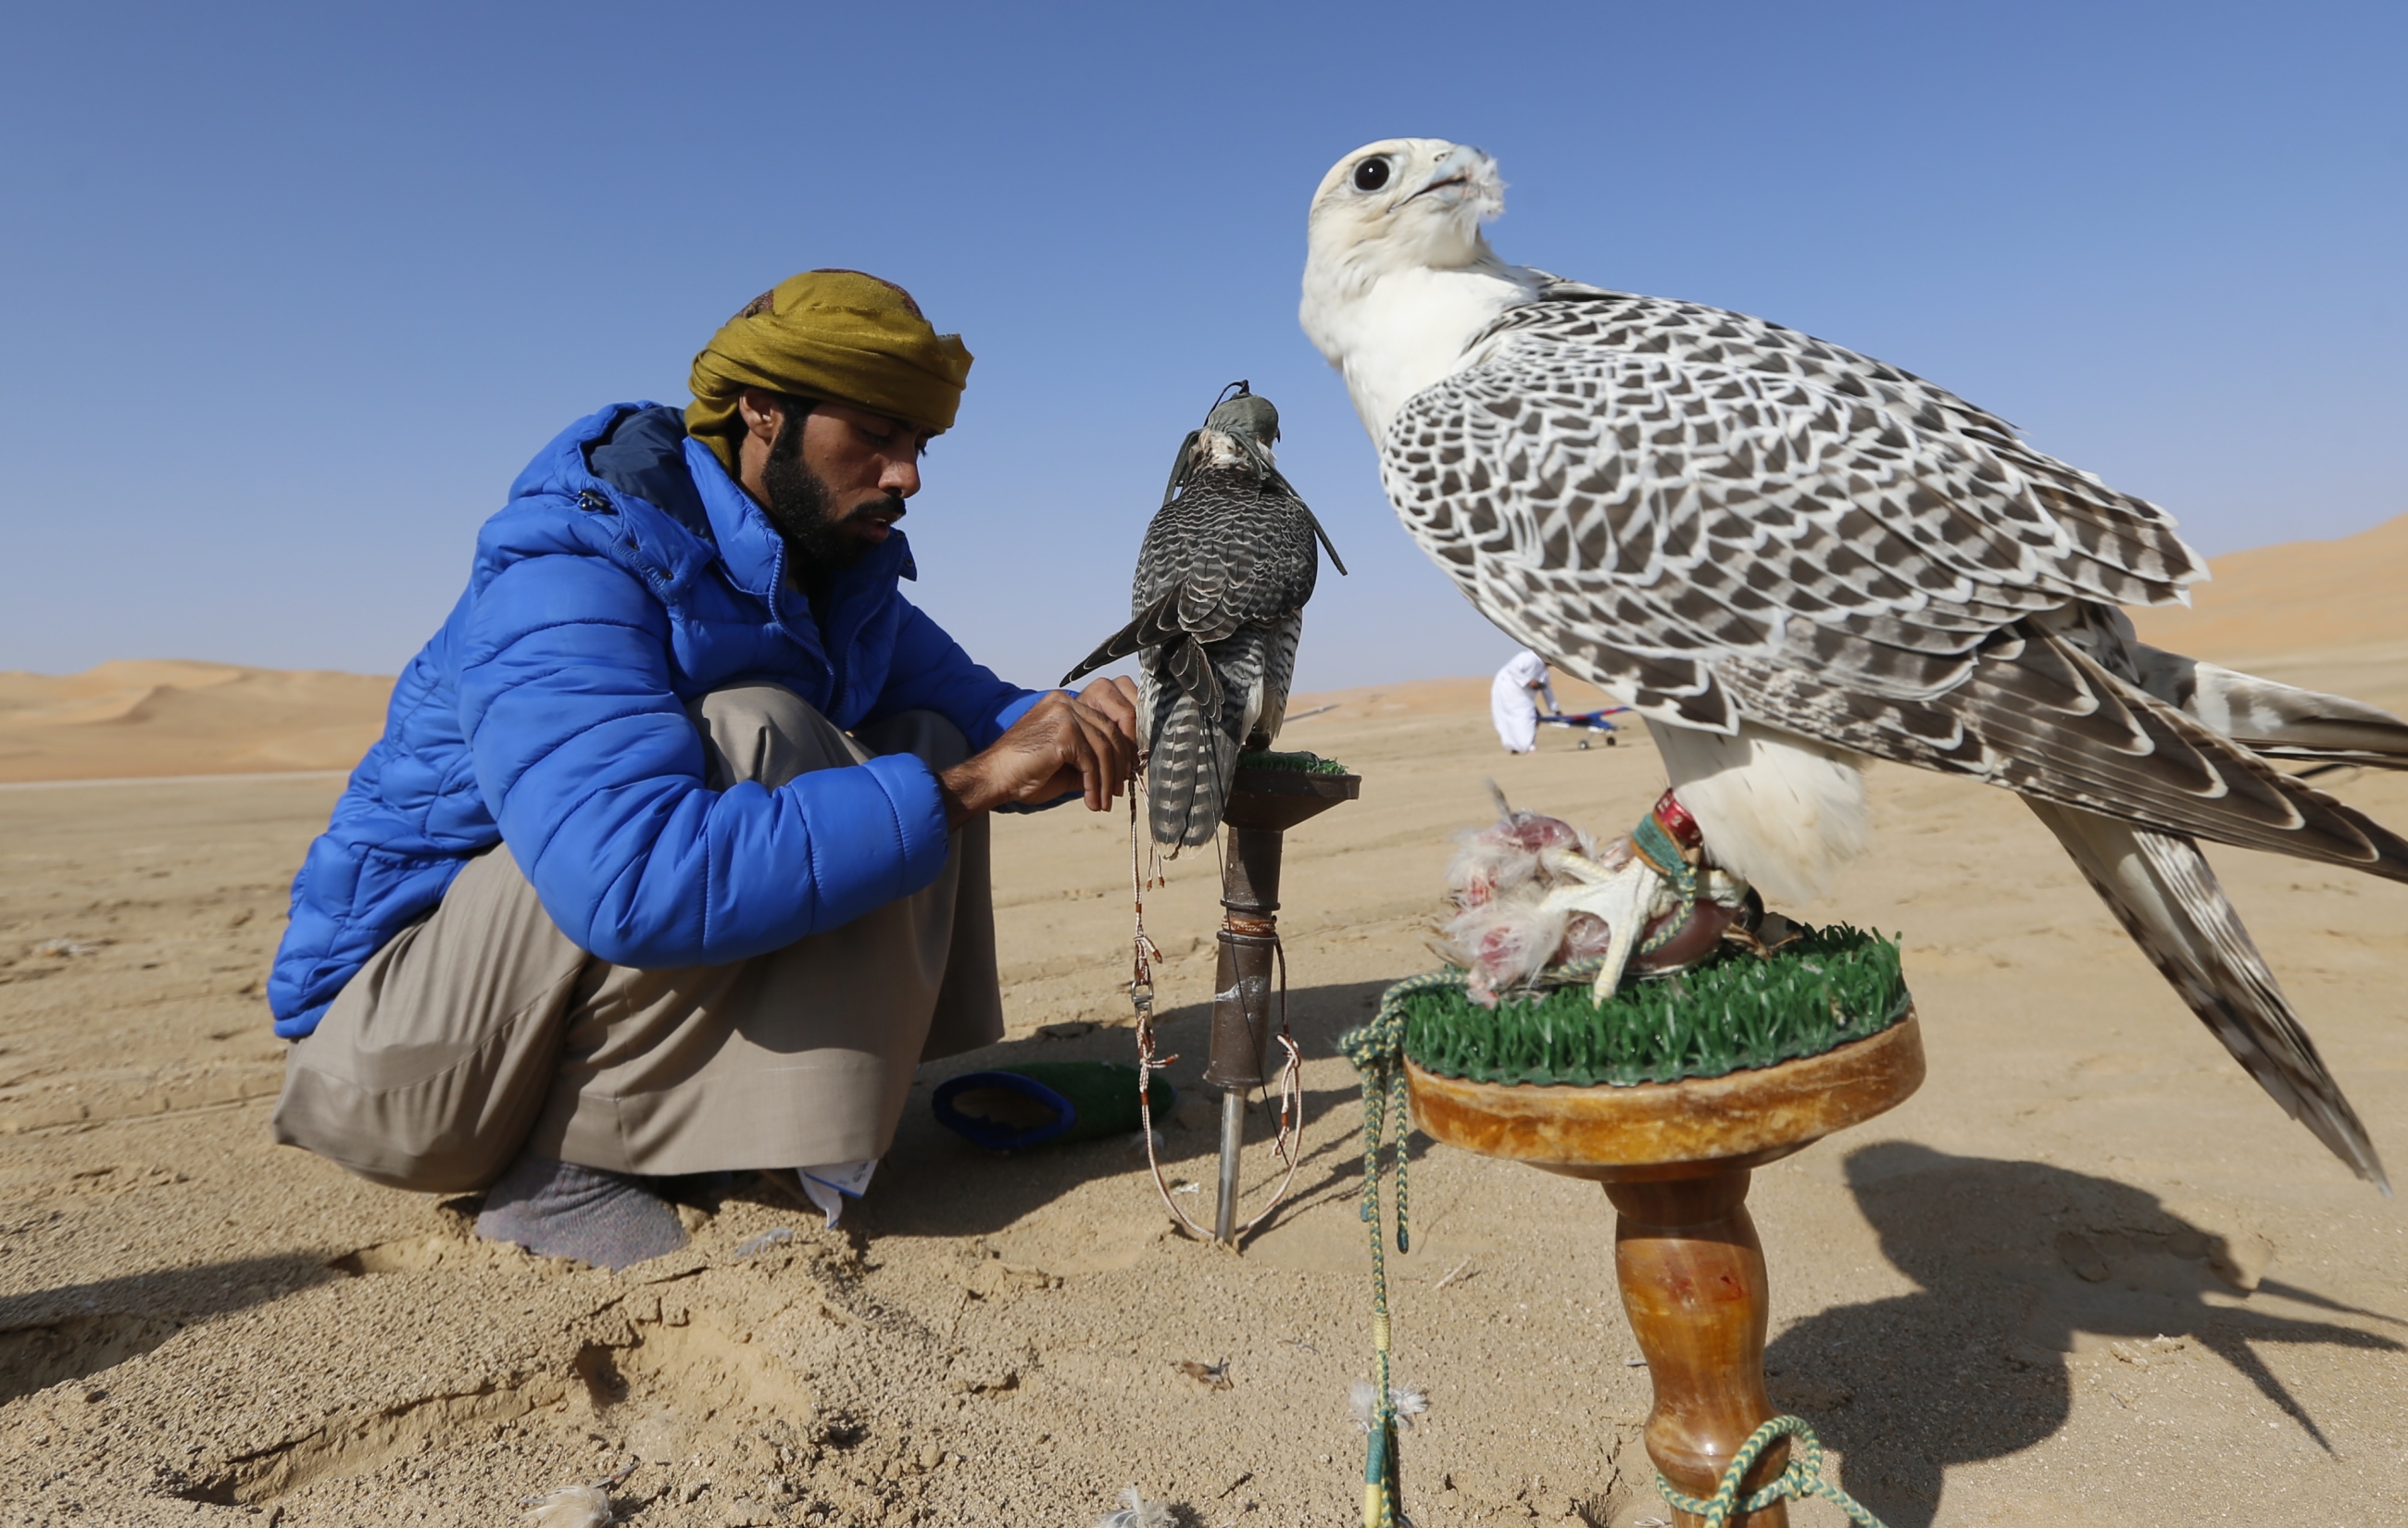 Falconry – which can be traced back nearly 3,000 years to Nineveh and Babylon – also attracts keen interest at the festival. The UAE numbers some of the most competitive falconers in the world – and features a falcon on its crest (AFP)